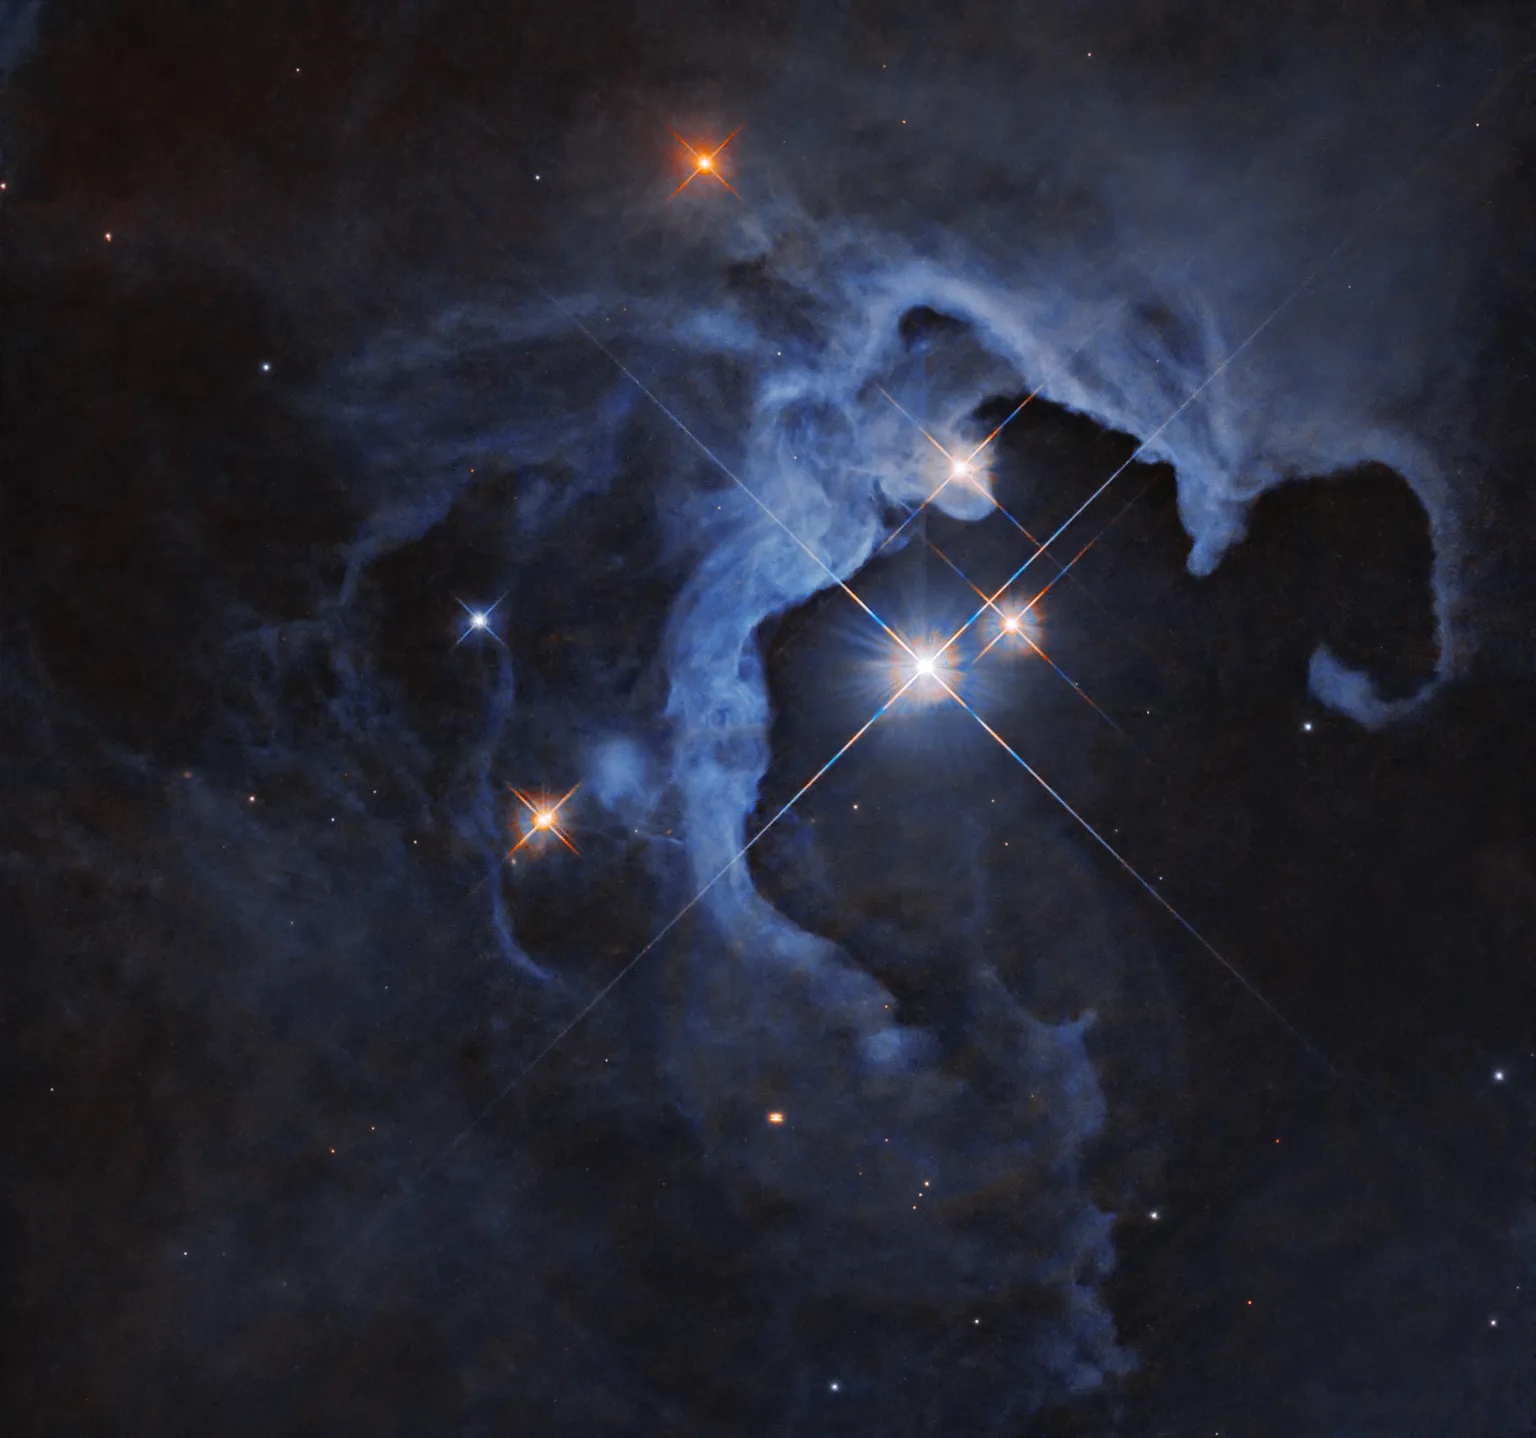 Hubble Sees a Brand New Triple Star System